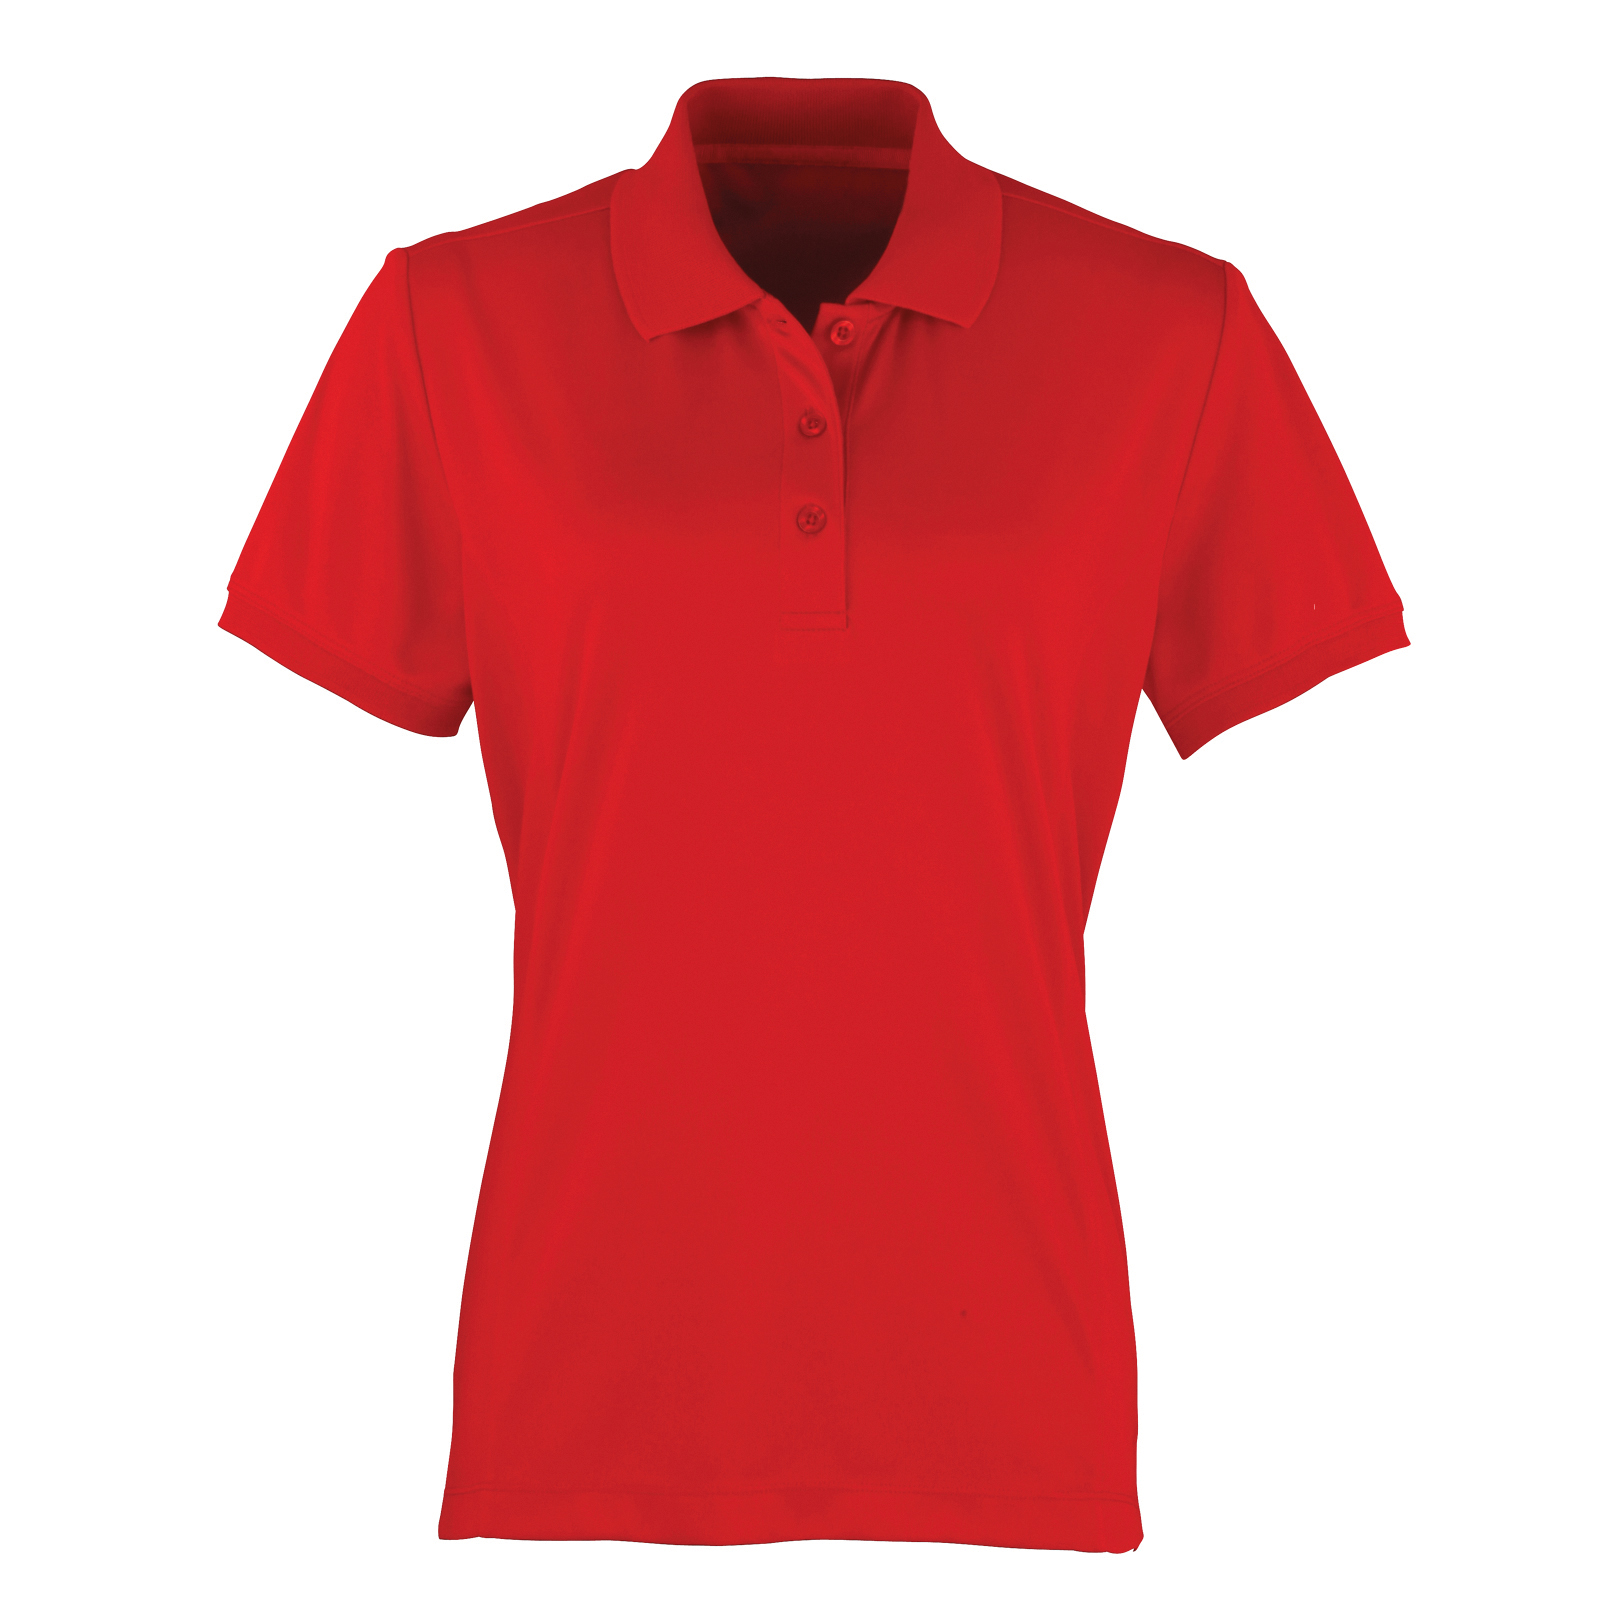 ax-httpswebsystems.s3.amazonaws.comtmp_for_downloadpremier-ladies-coolchecker-pique-polo-red.jpg